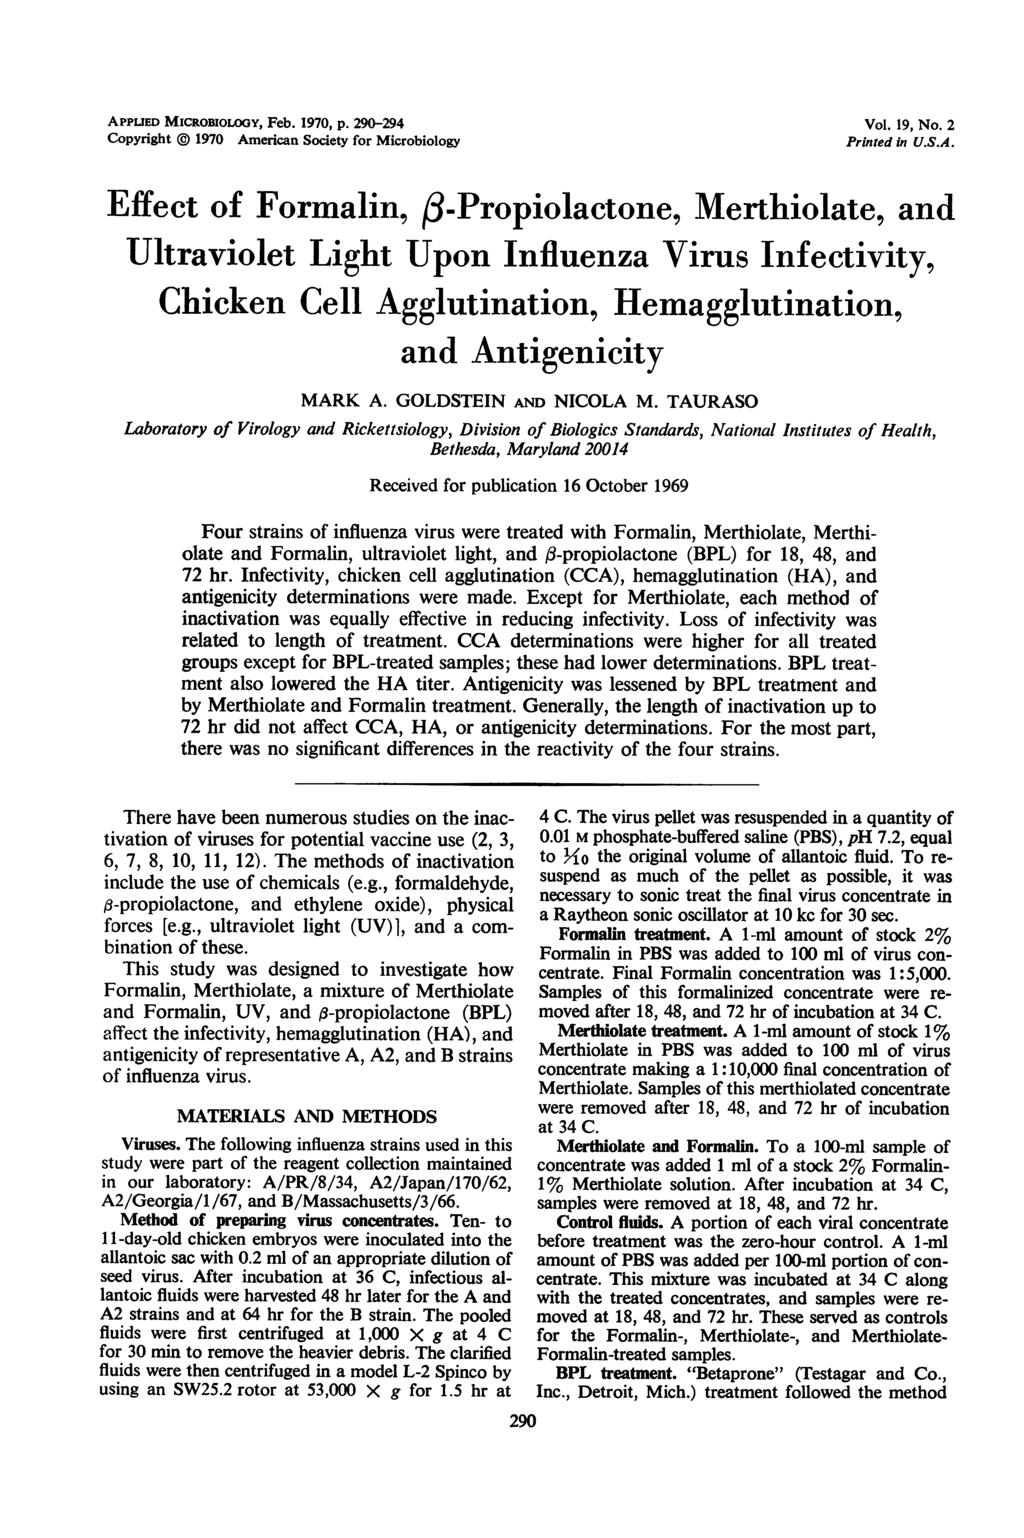 APPuED MICROBIOLOGY, Feb. 197, p. 29-294 Copyright @ 197 American Society for Microbiology Vol. 19, No. 2 Printed in U.S.A. Effect of Formalin, 3-Propiolactone, Merthiolate, and Ultraviolet Light Upon Influenza Virus Infectivity, Chicken Cell Agglutination, Hemagglutination, and Antigenicity MARK A.